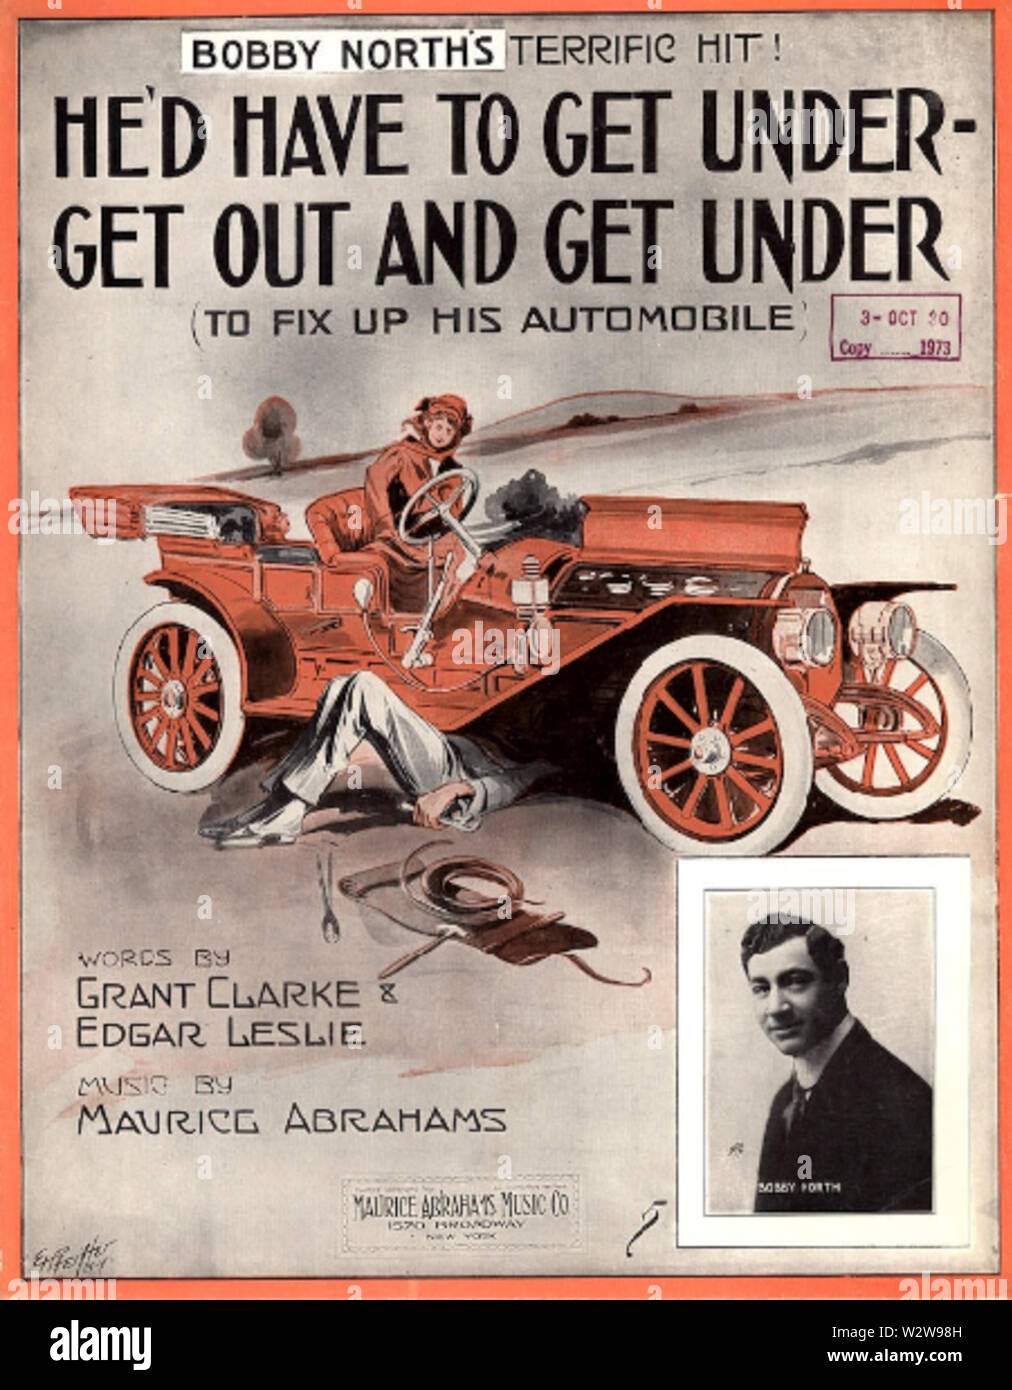 He'd Have to Get Under – Get Out and Get Under - Bobby North 1908 Stock Photo